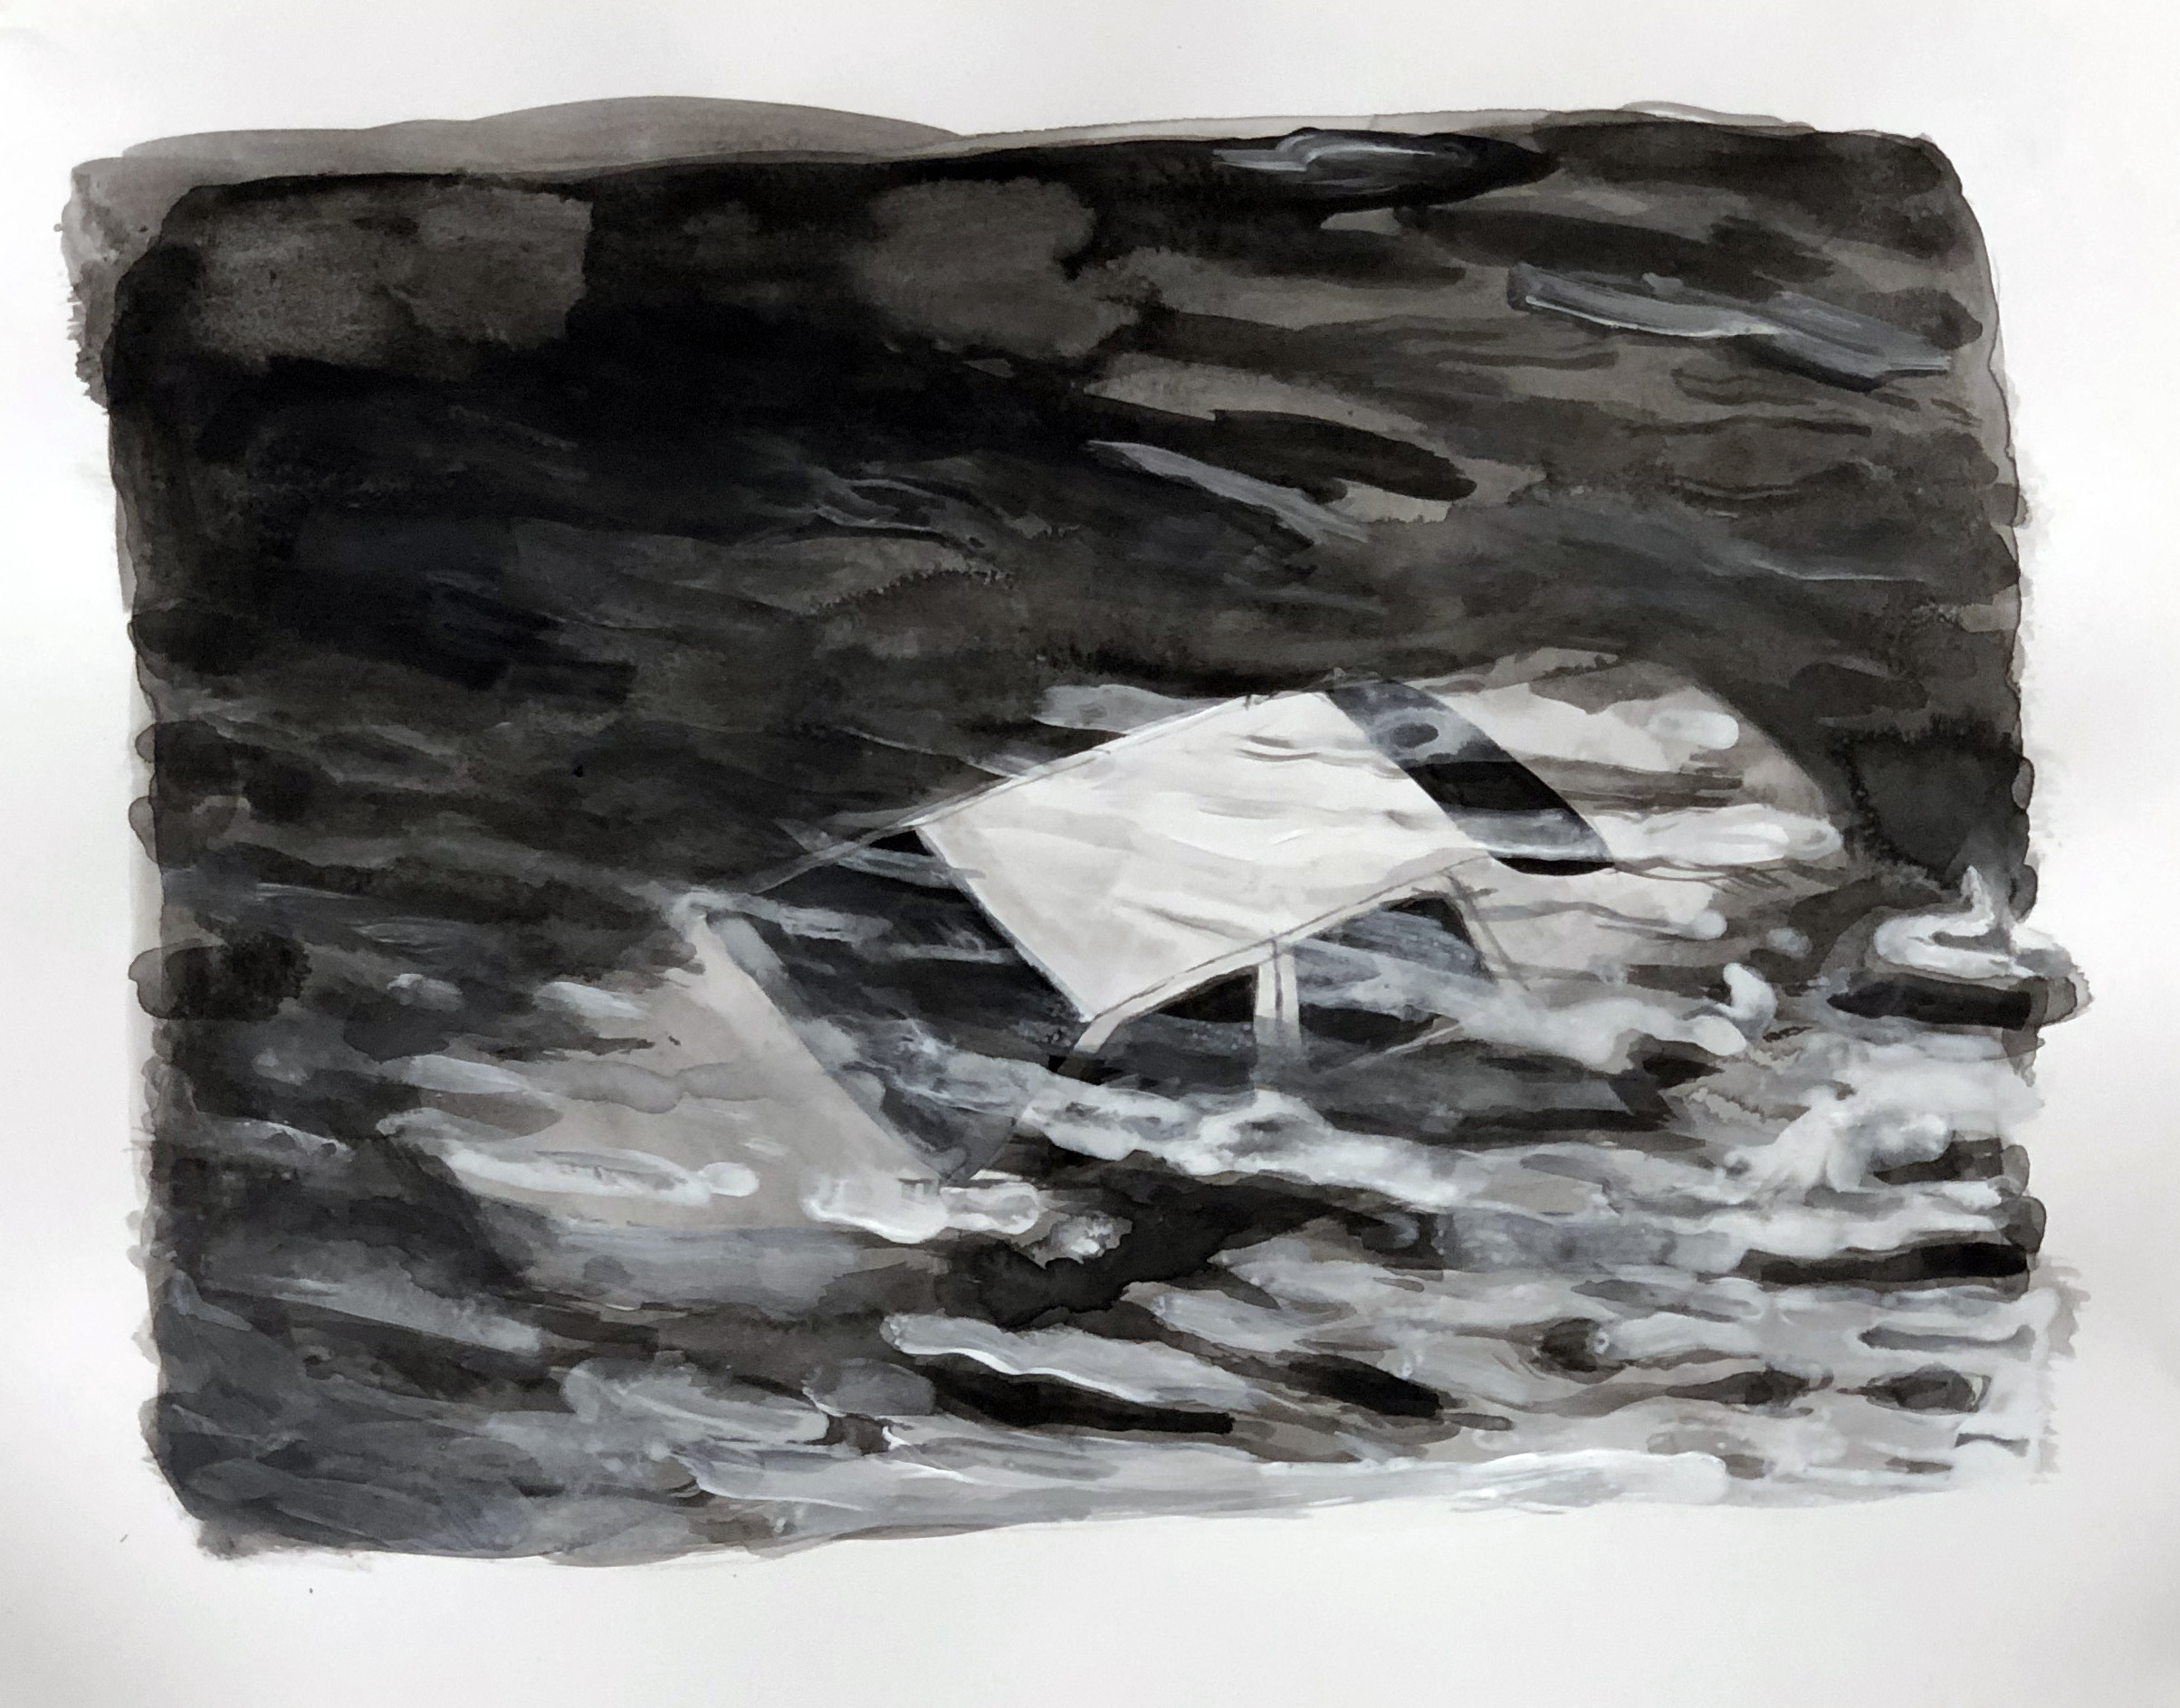   Untitled (Houston) , 2019 Black gesso on paper 11 x 14 inches (28cm x 35cm) 